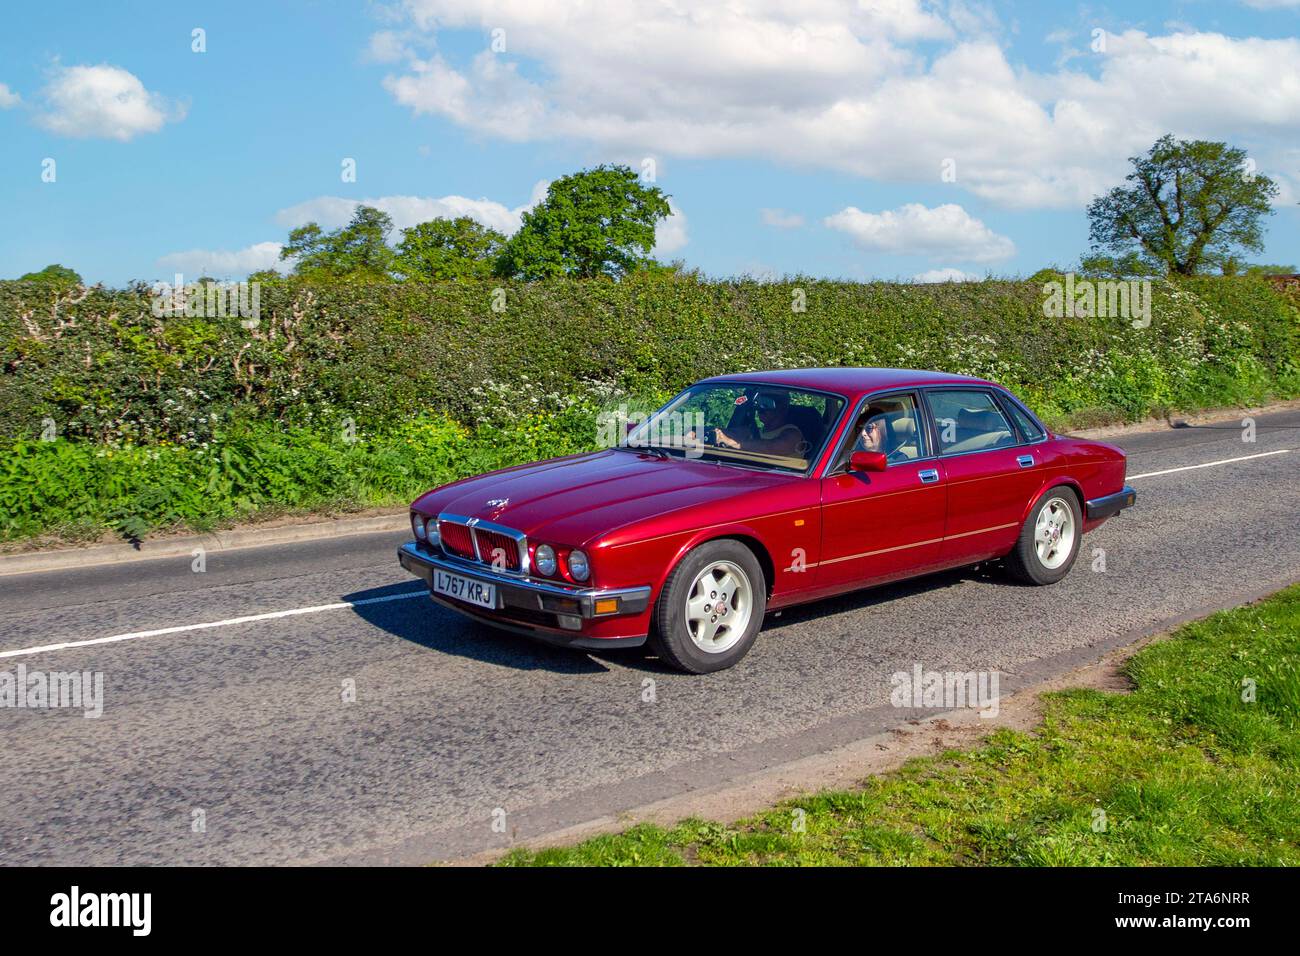 1994 90s nineties Red Jaguar Xj6 3.2 S Auto Car Saloon Petrol 3239 cc; Vintage, restored classic motors, automobile collectors motoring enthusiasts, historic veteran cars travelling in Cheshire, UK Stock Photo